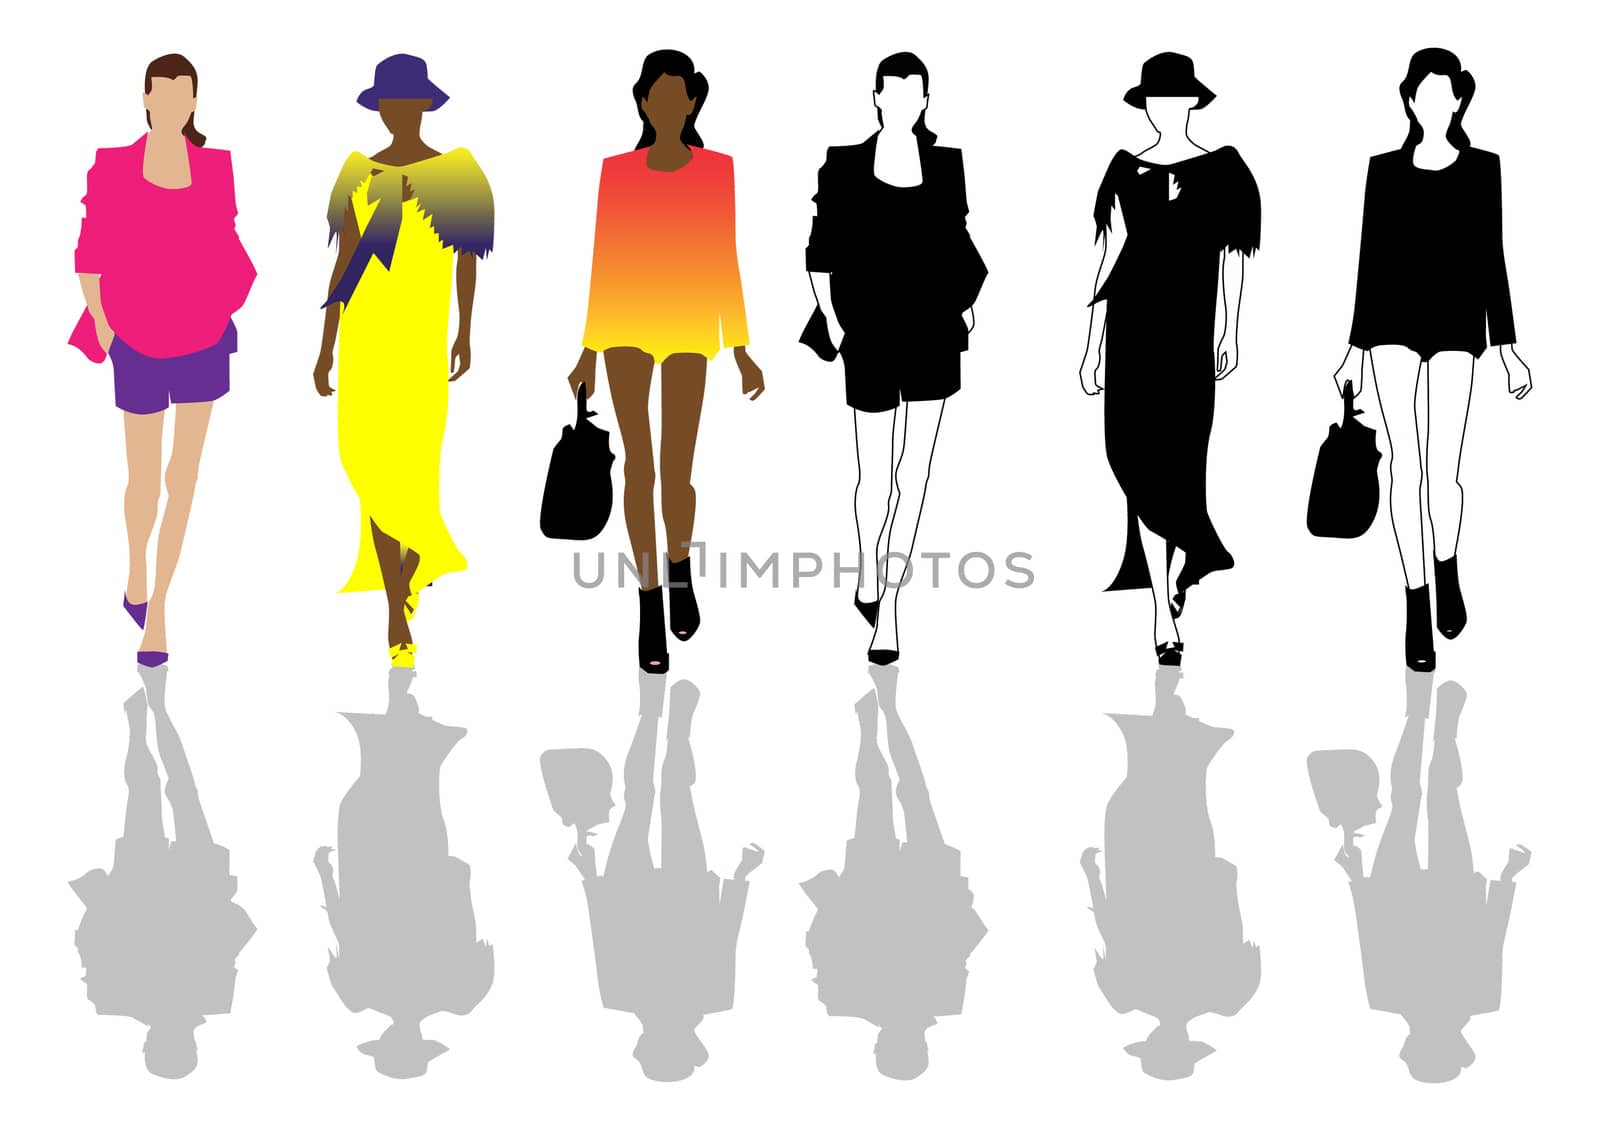 Fashion clothing illustration, vector design dress, models, show by IconsJewelry